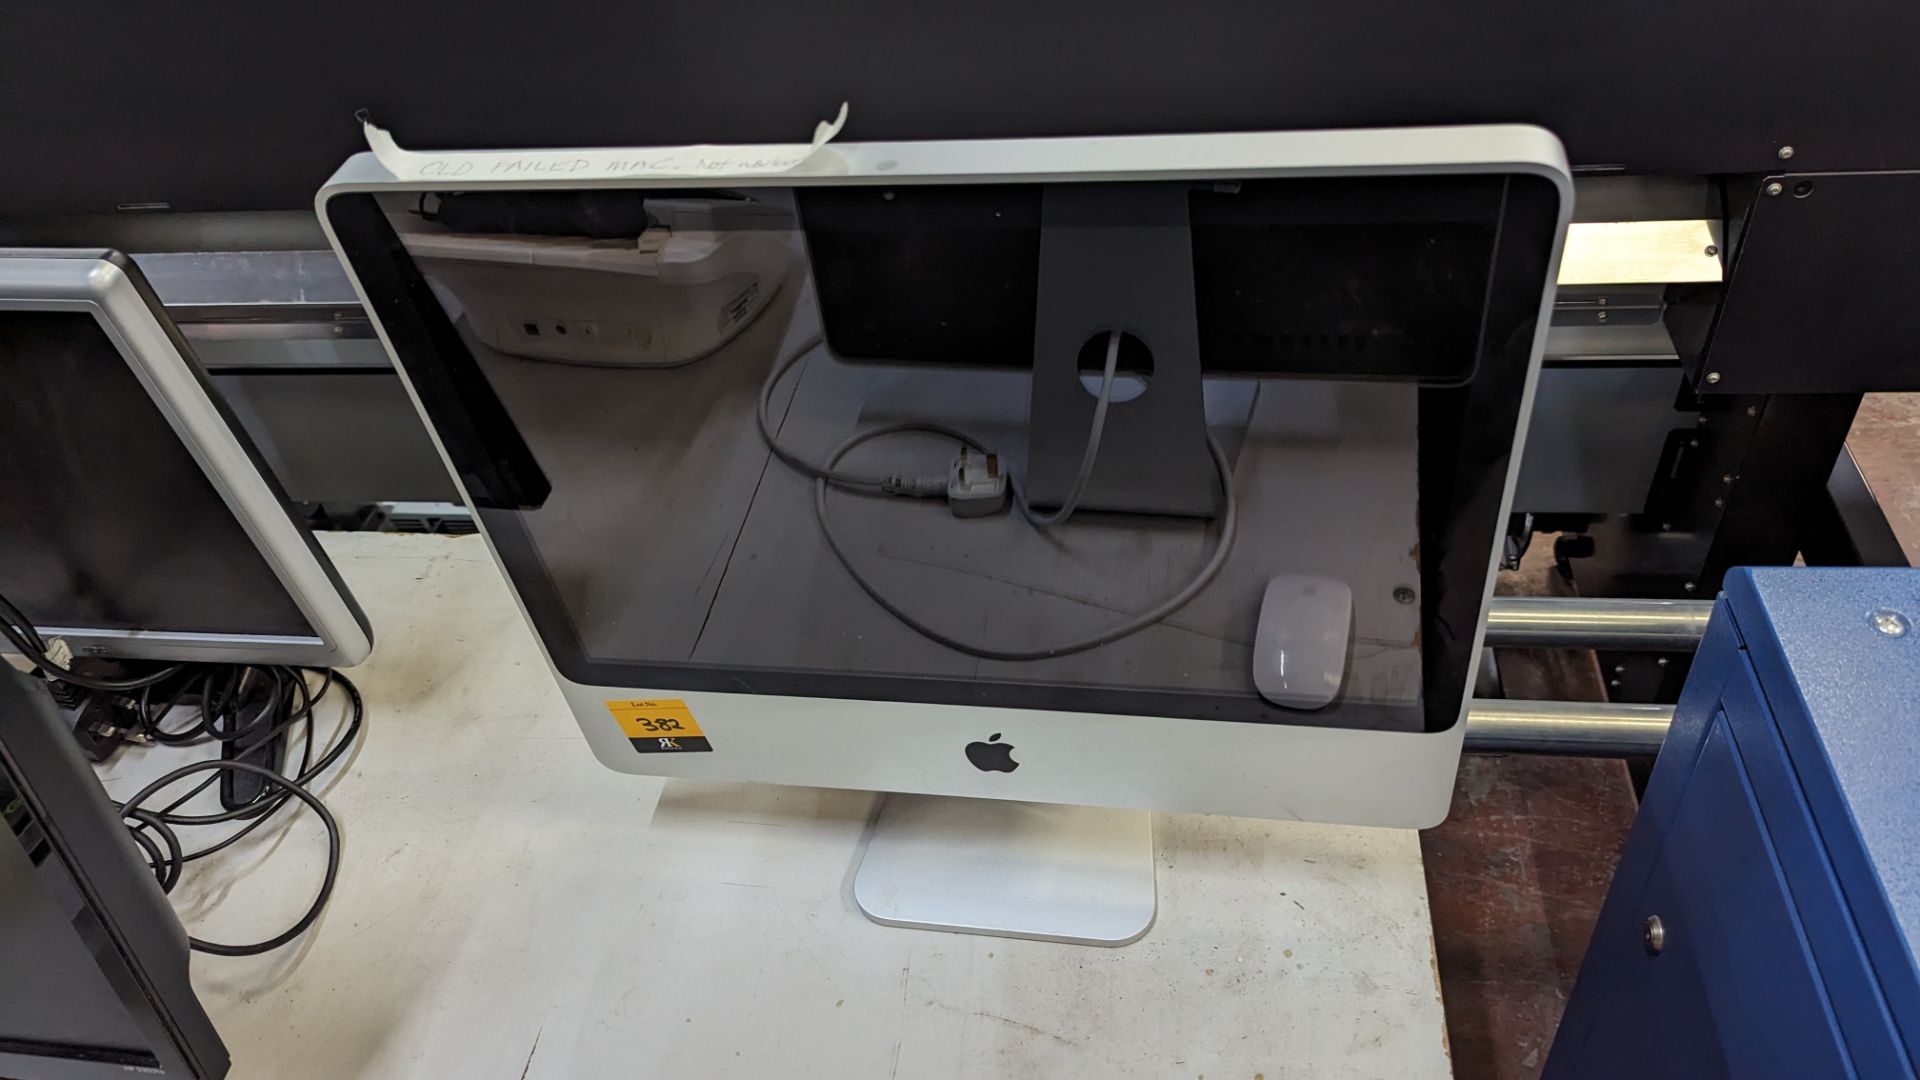 Apple iMac computer model A1224 EMC 2210 including mouse but no keyboard. NB not working